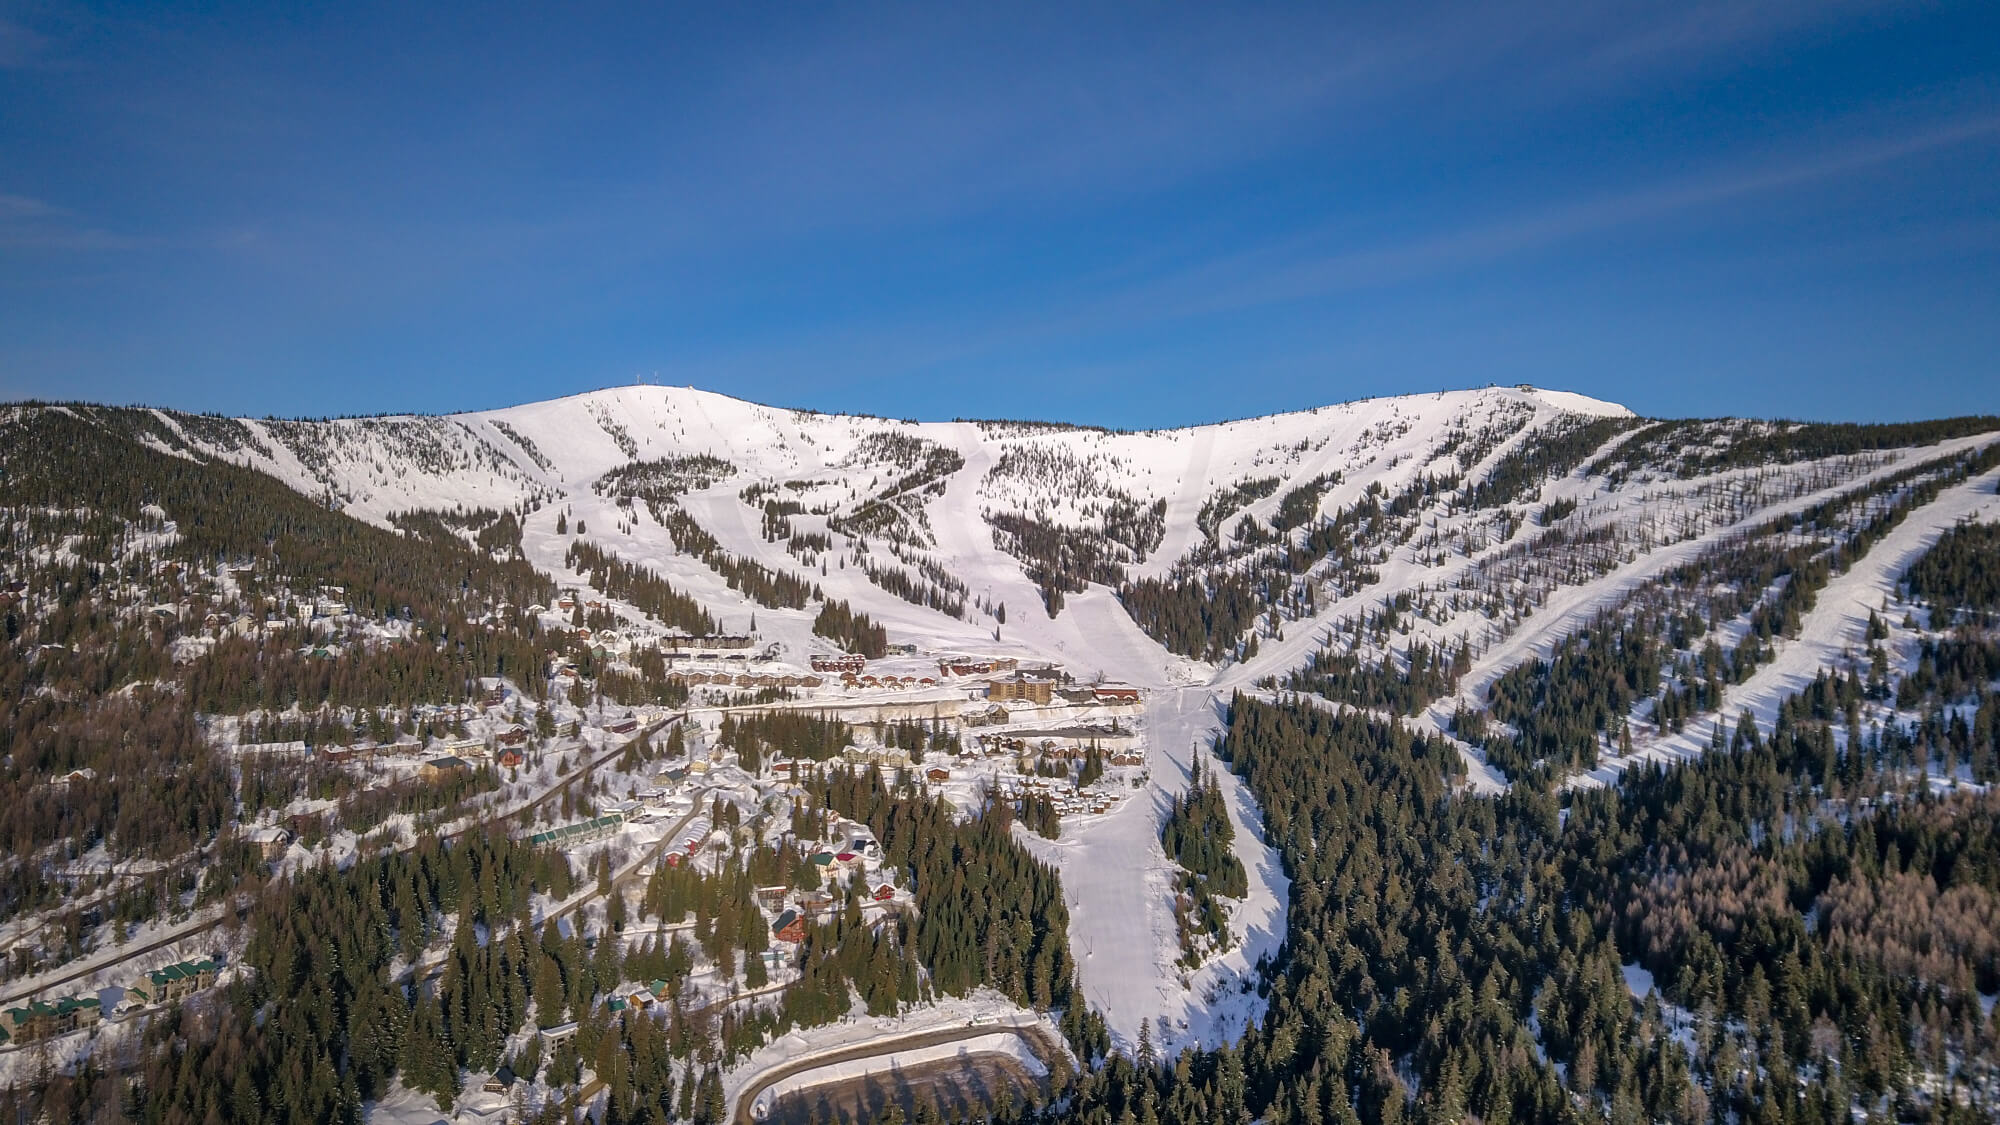 Schweitzer and the village by drone